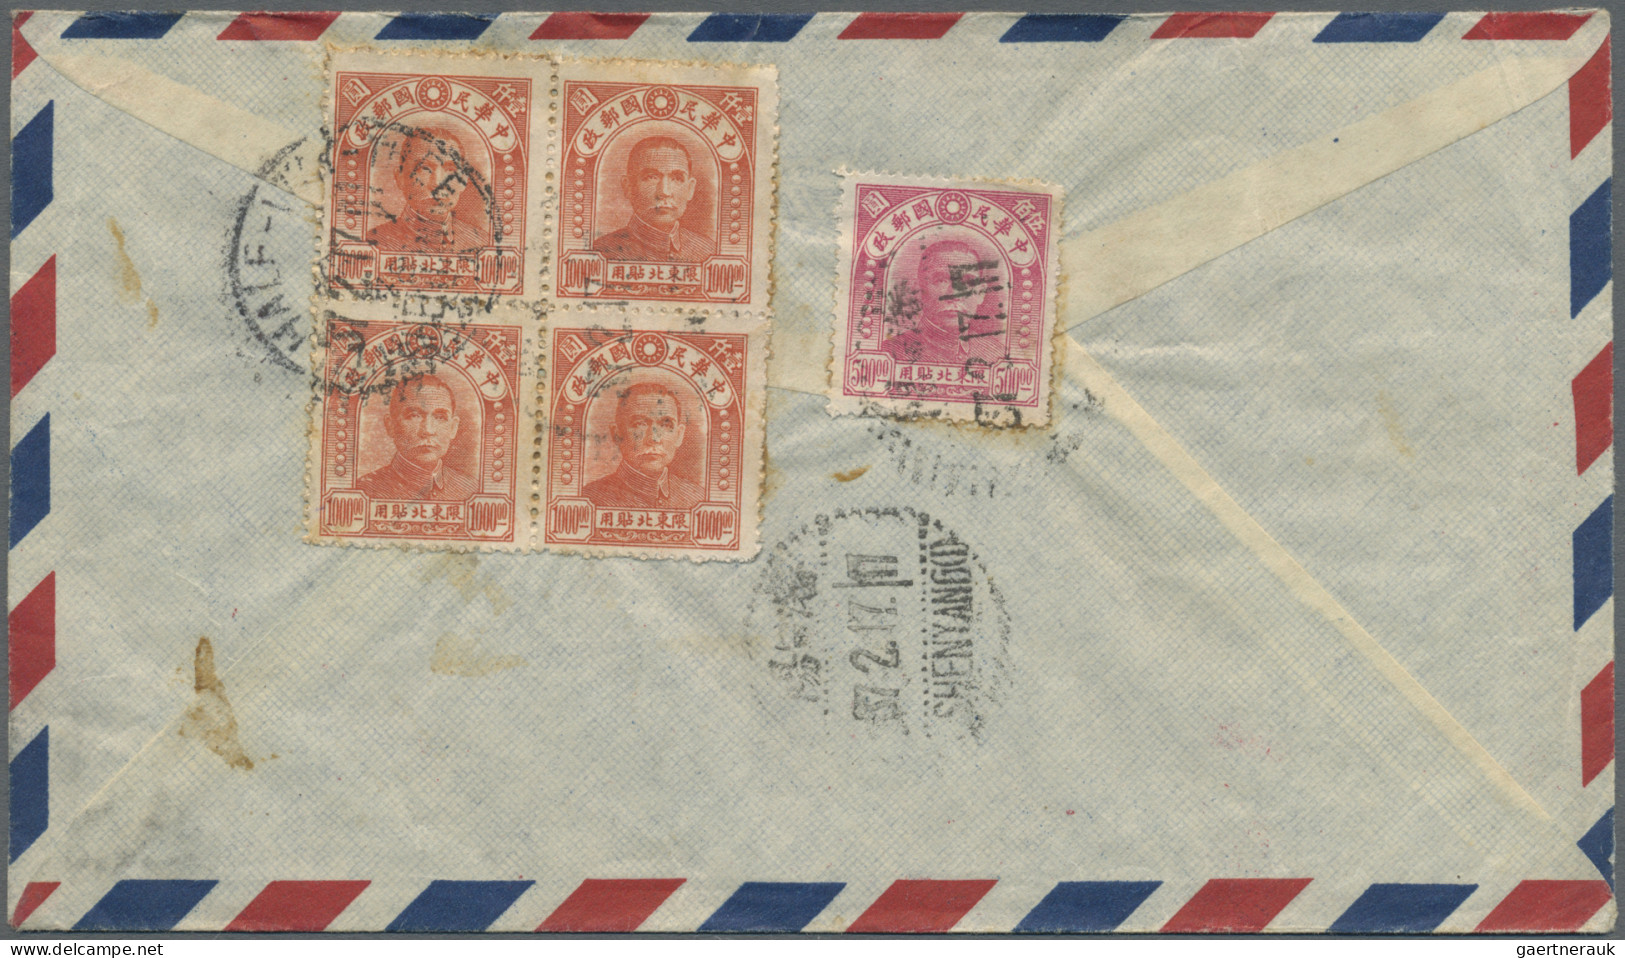 China: 1913/1946, covers/used ppc (13) inc. junk 4 C. used bisected "SHAMEEN" 19